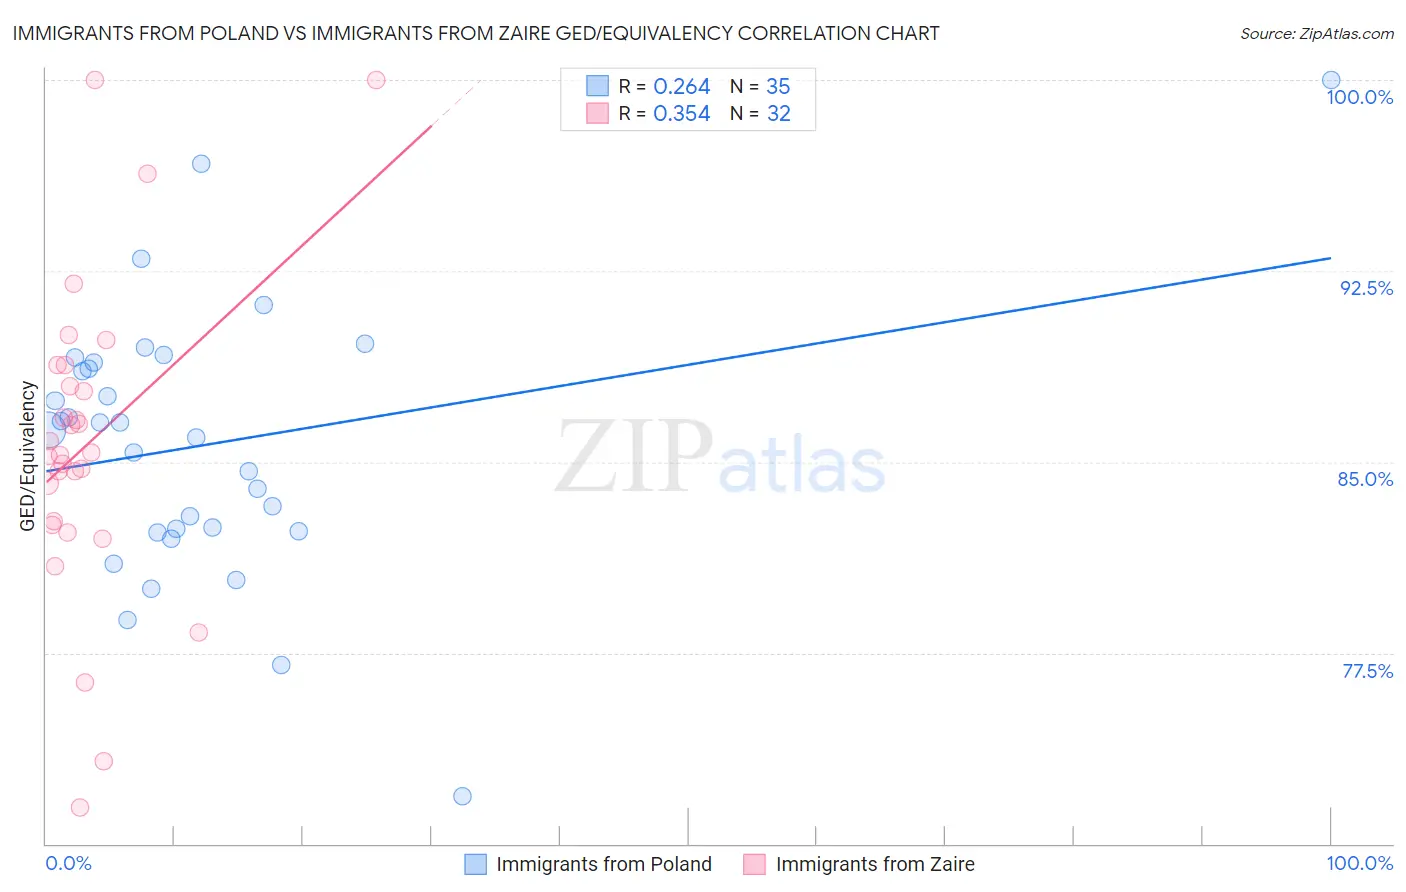 Immigrants from Poland vs Immigrants from Zaire GED/Equivalency